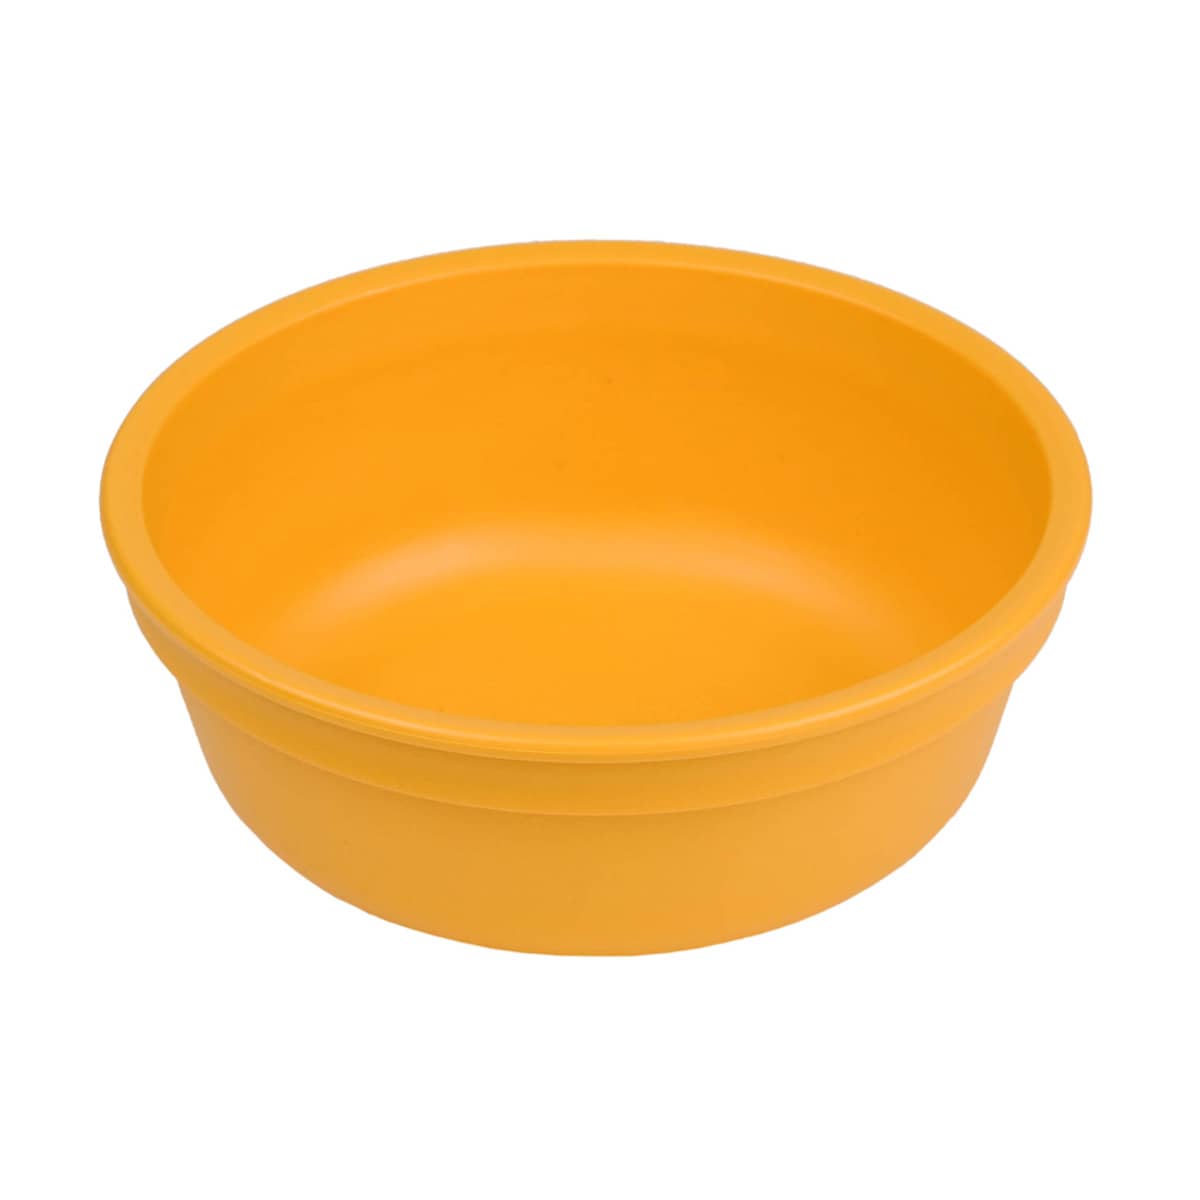 Re-Play Recycled Bowl - Sunny Yellow